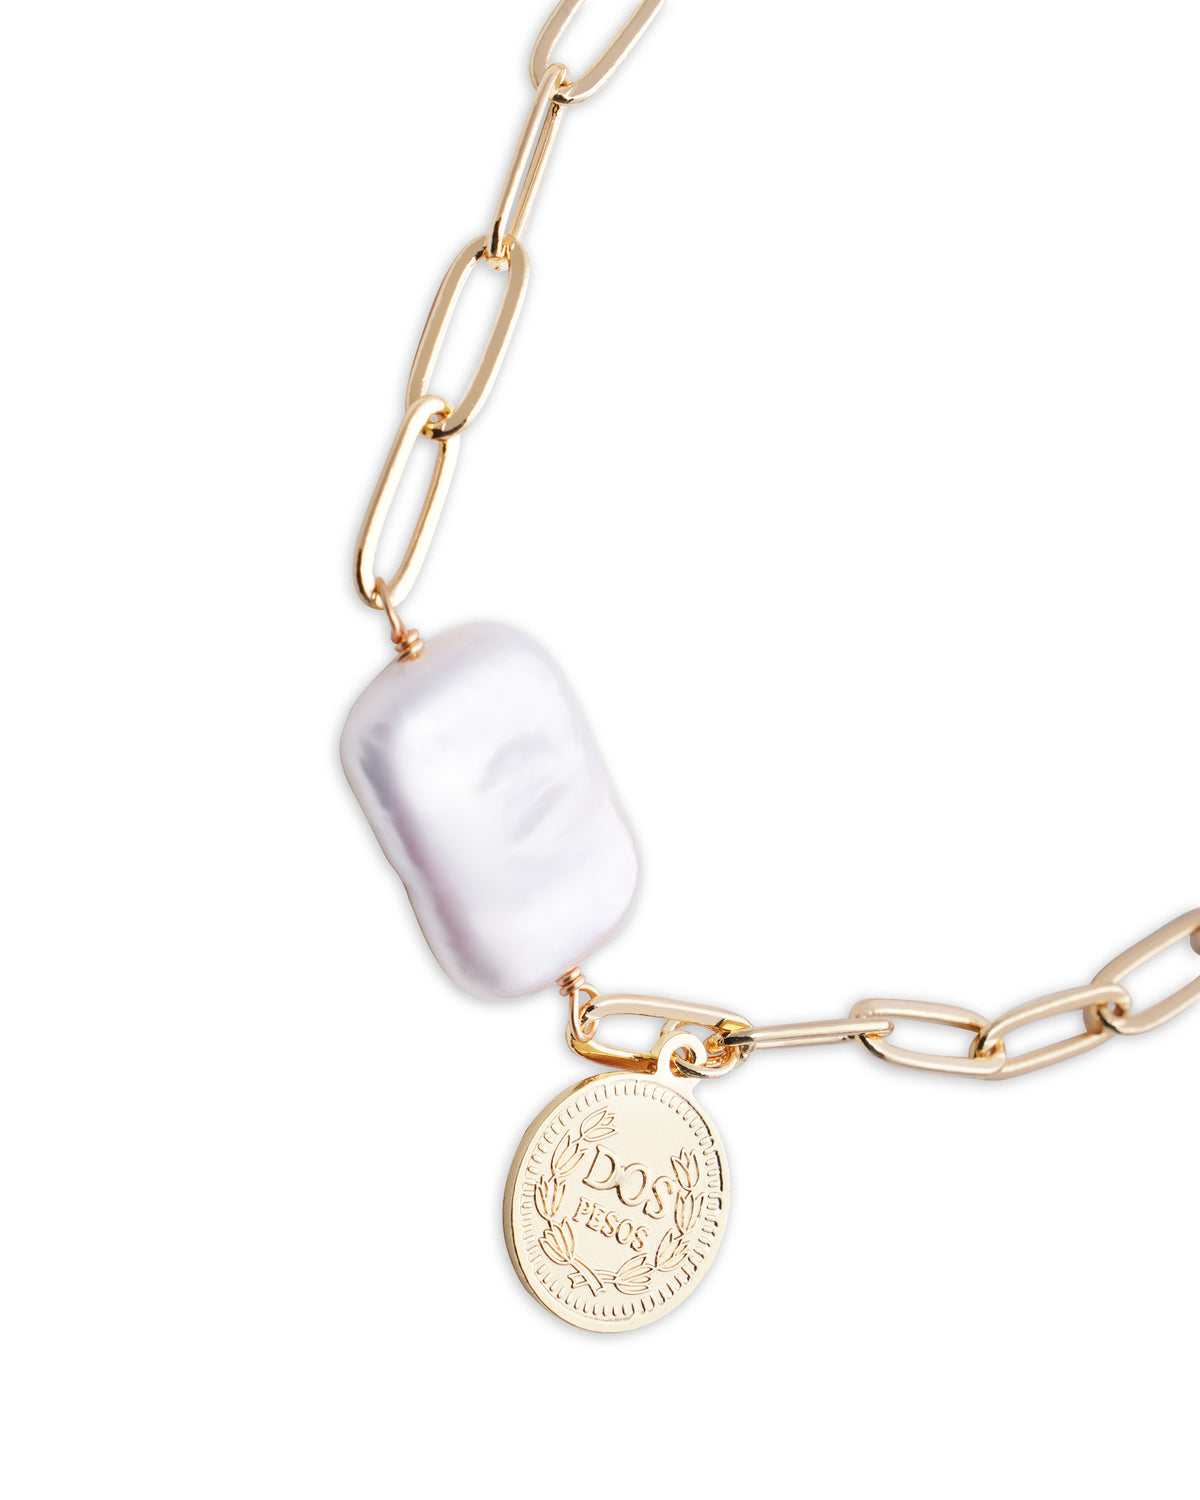 14K Gold Baroque Pearl & Chain Coin Bracelet